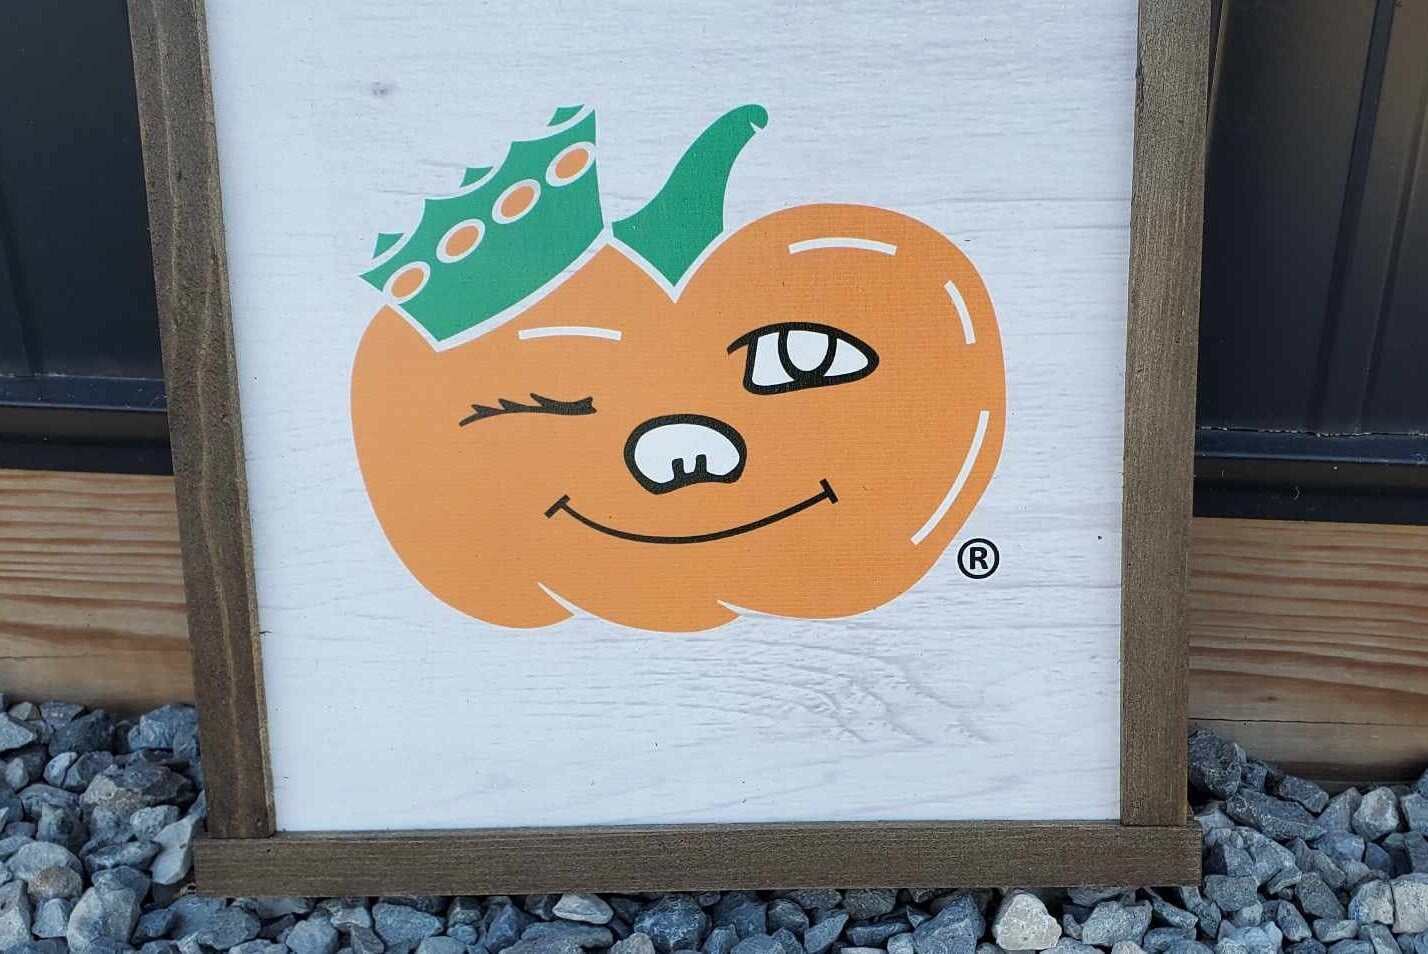 Hometown Winky Pumpkin Circleville Round Town Small Town Home Decor Mascot Farm Orange and Green White Wash Wooden Wood Smile Happy Handmade